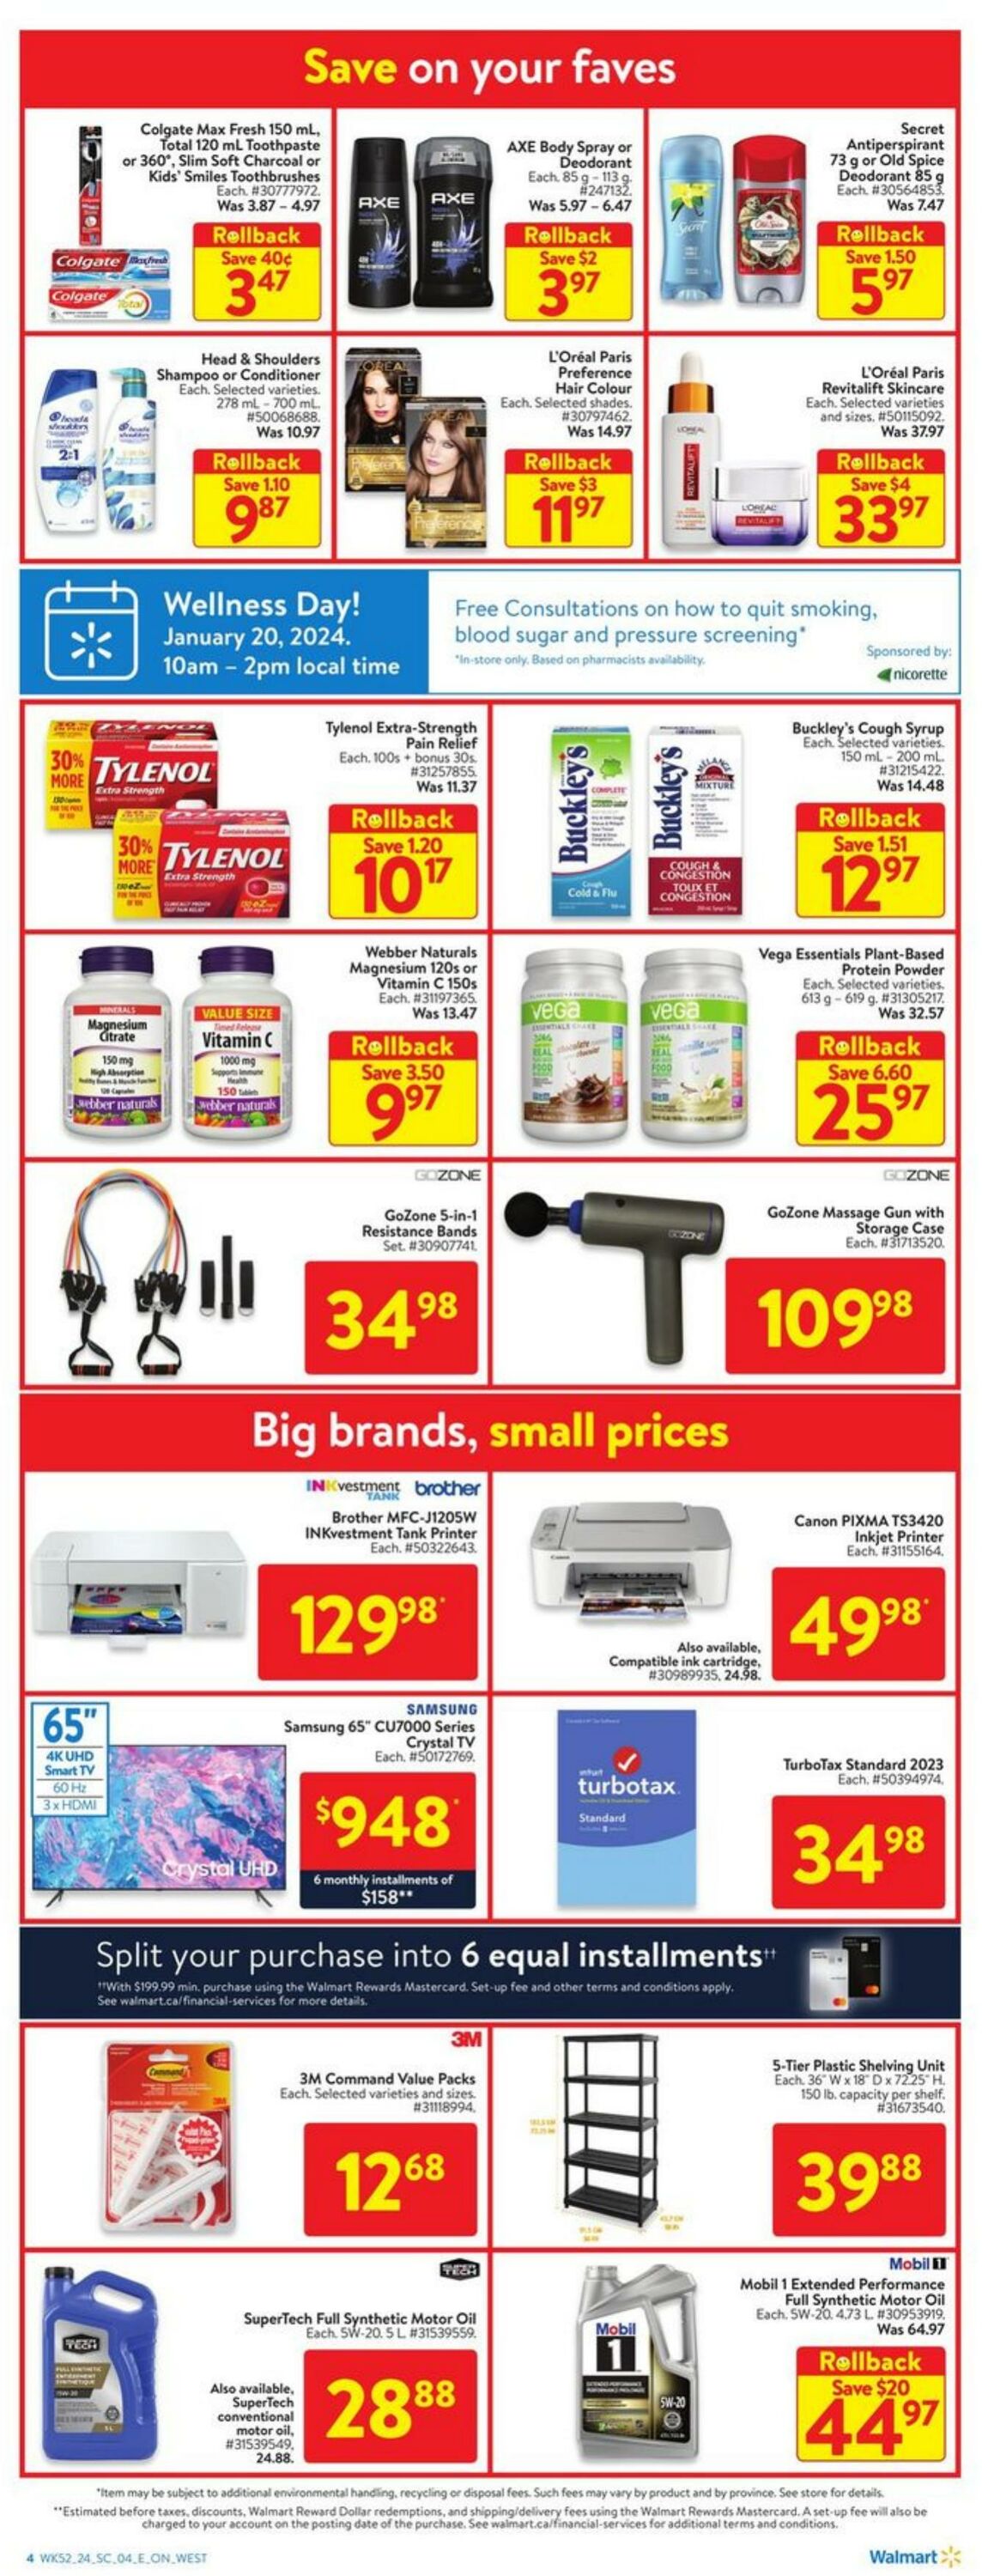 Walmart Promotional Flyer - Ontario - Valid from 18.01 to 24.01 - Page ...